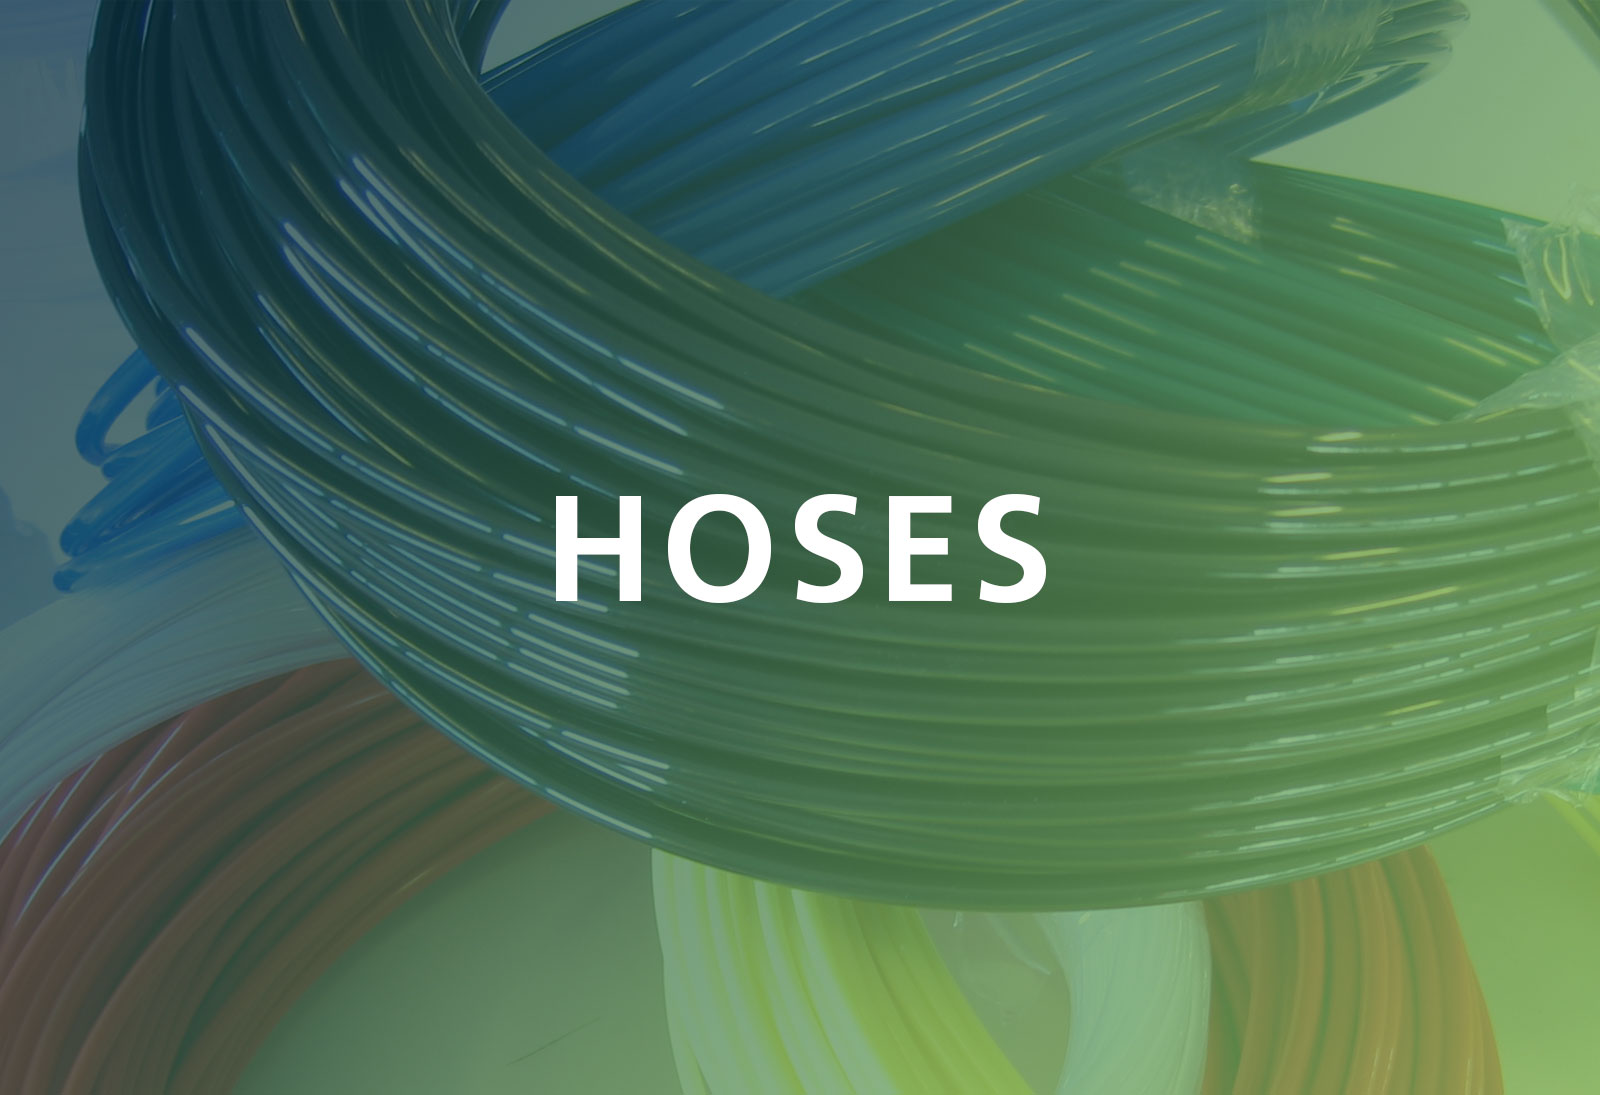 Production of plastic hoses